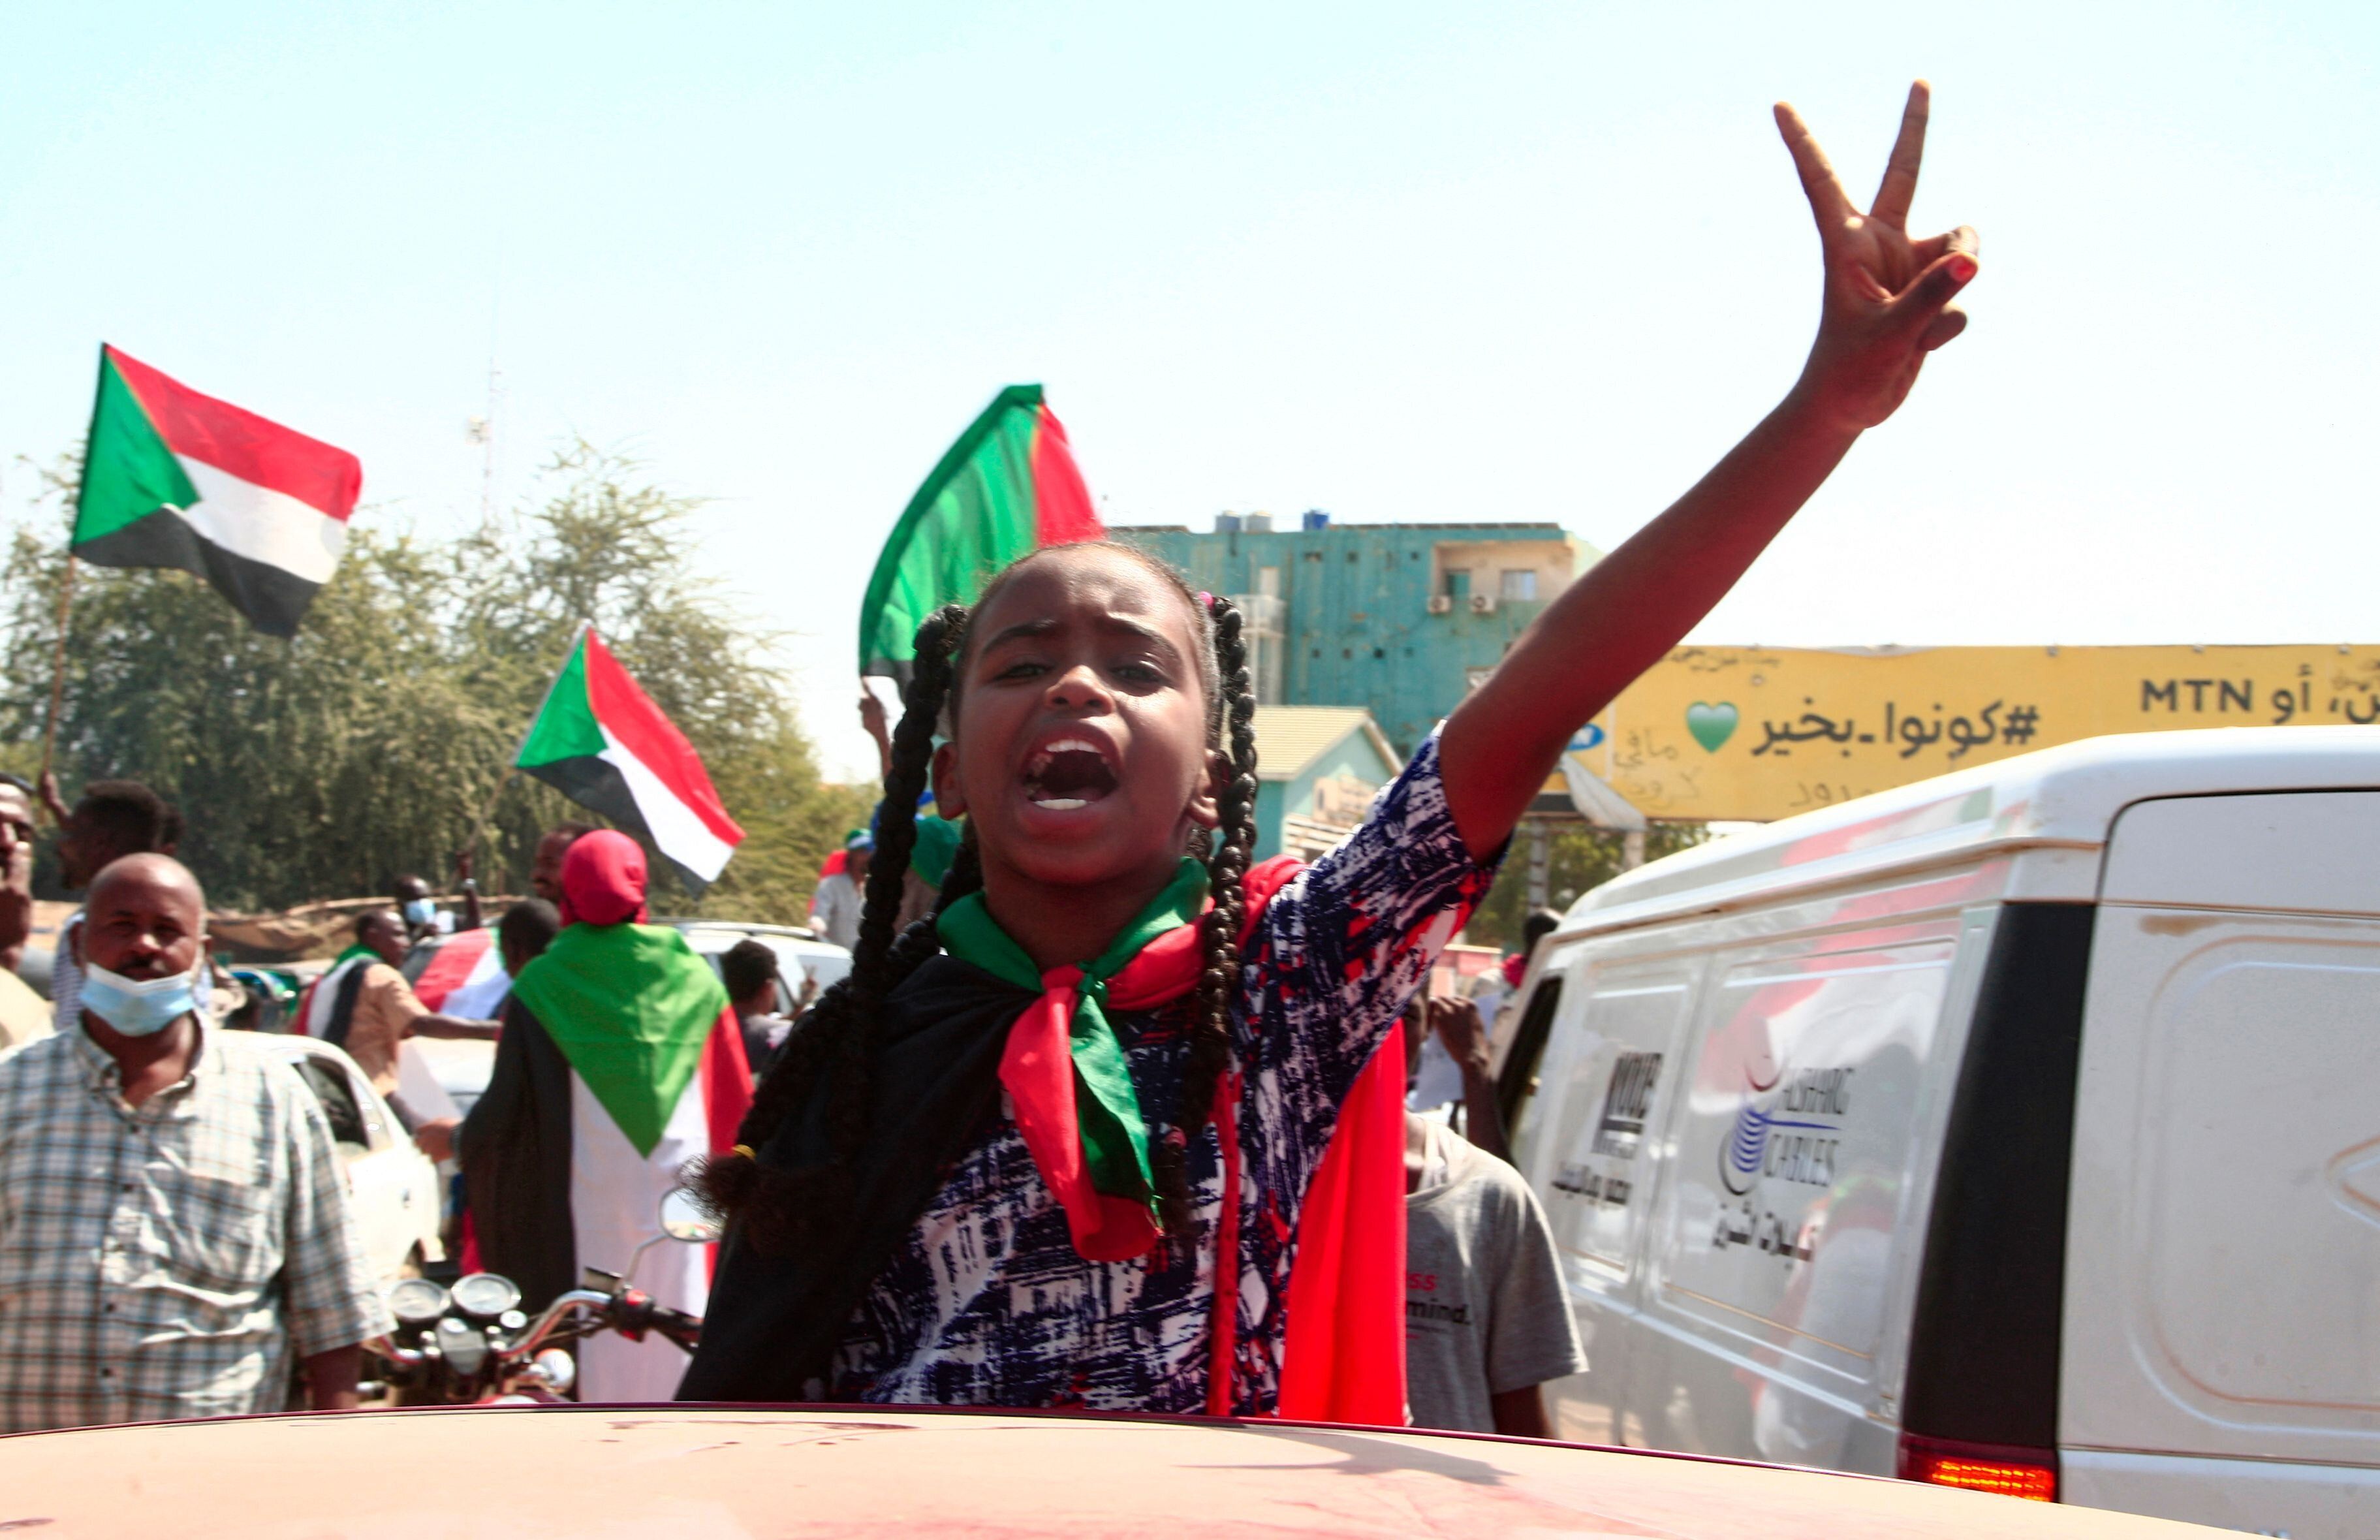 A young Sudanese girl takes part in a demonstration in Omdurman, the capital Khartoum's twin city, to demand the government's transition to civilian rule, on October 21, 2021. - Supporters of Sudan's transitional government took to the streets of the capital today as rival demonstrators kept up a sit-in demanding a return to military rule. The mainstream faction backs the transition to civilian rule, while supporters of the breakaway faction are demanding the military take over. (Photo by Ebrahim HAMID / AFP) (Photo by EBRAHIM HAMID/AFP via Getty Images)